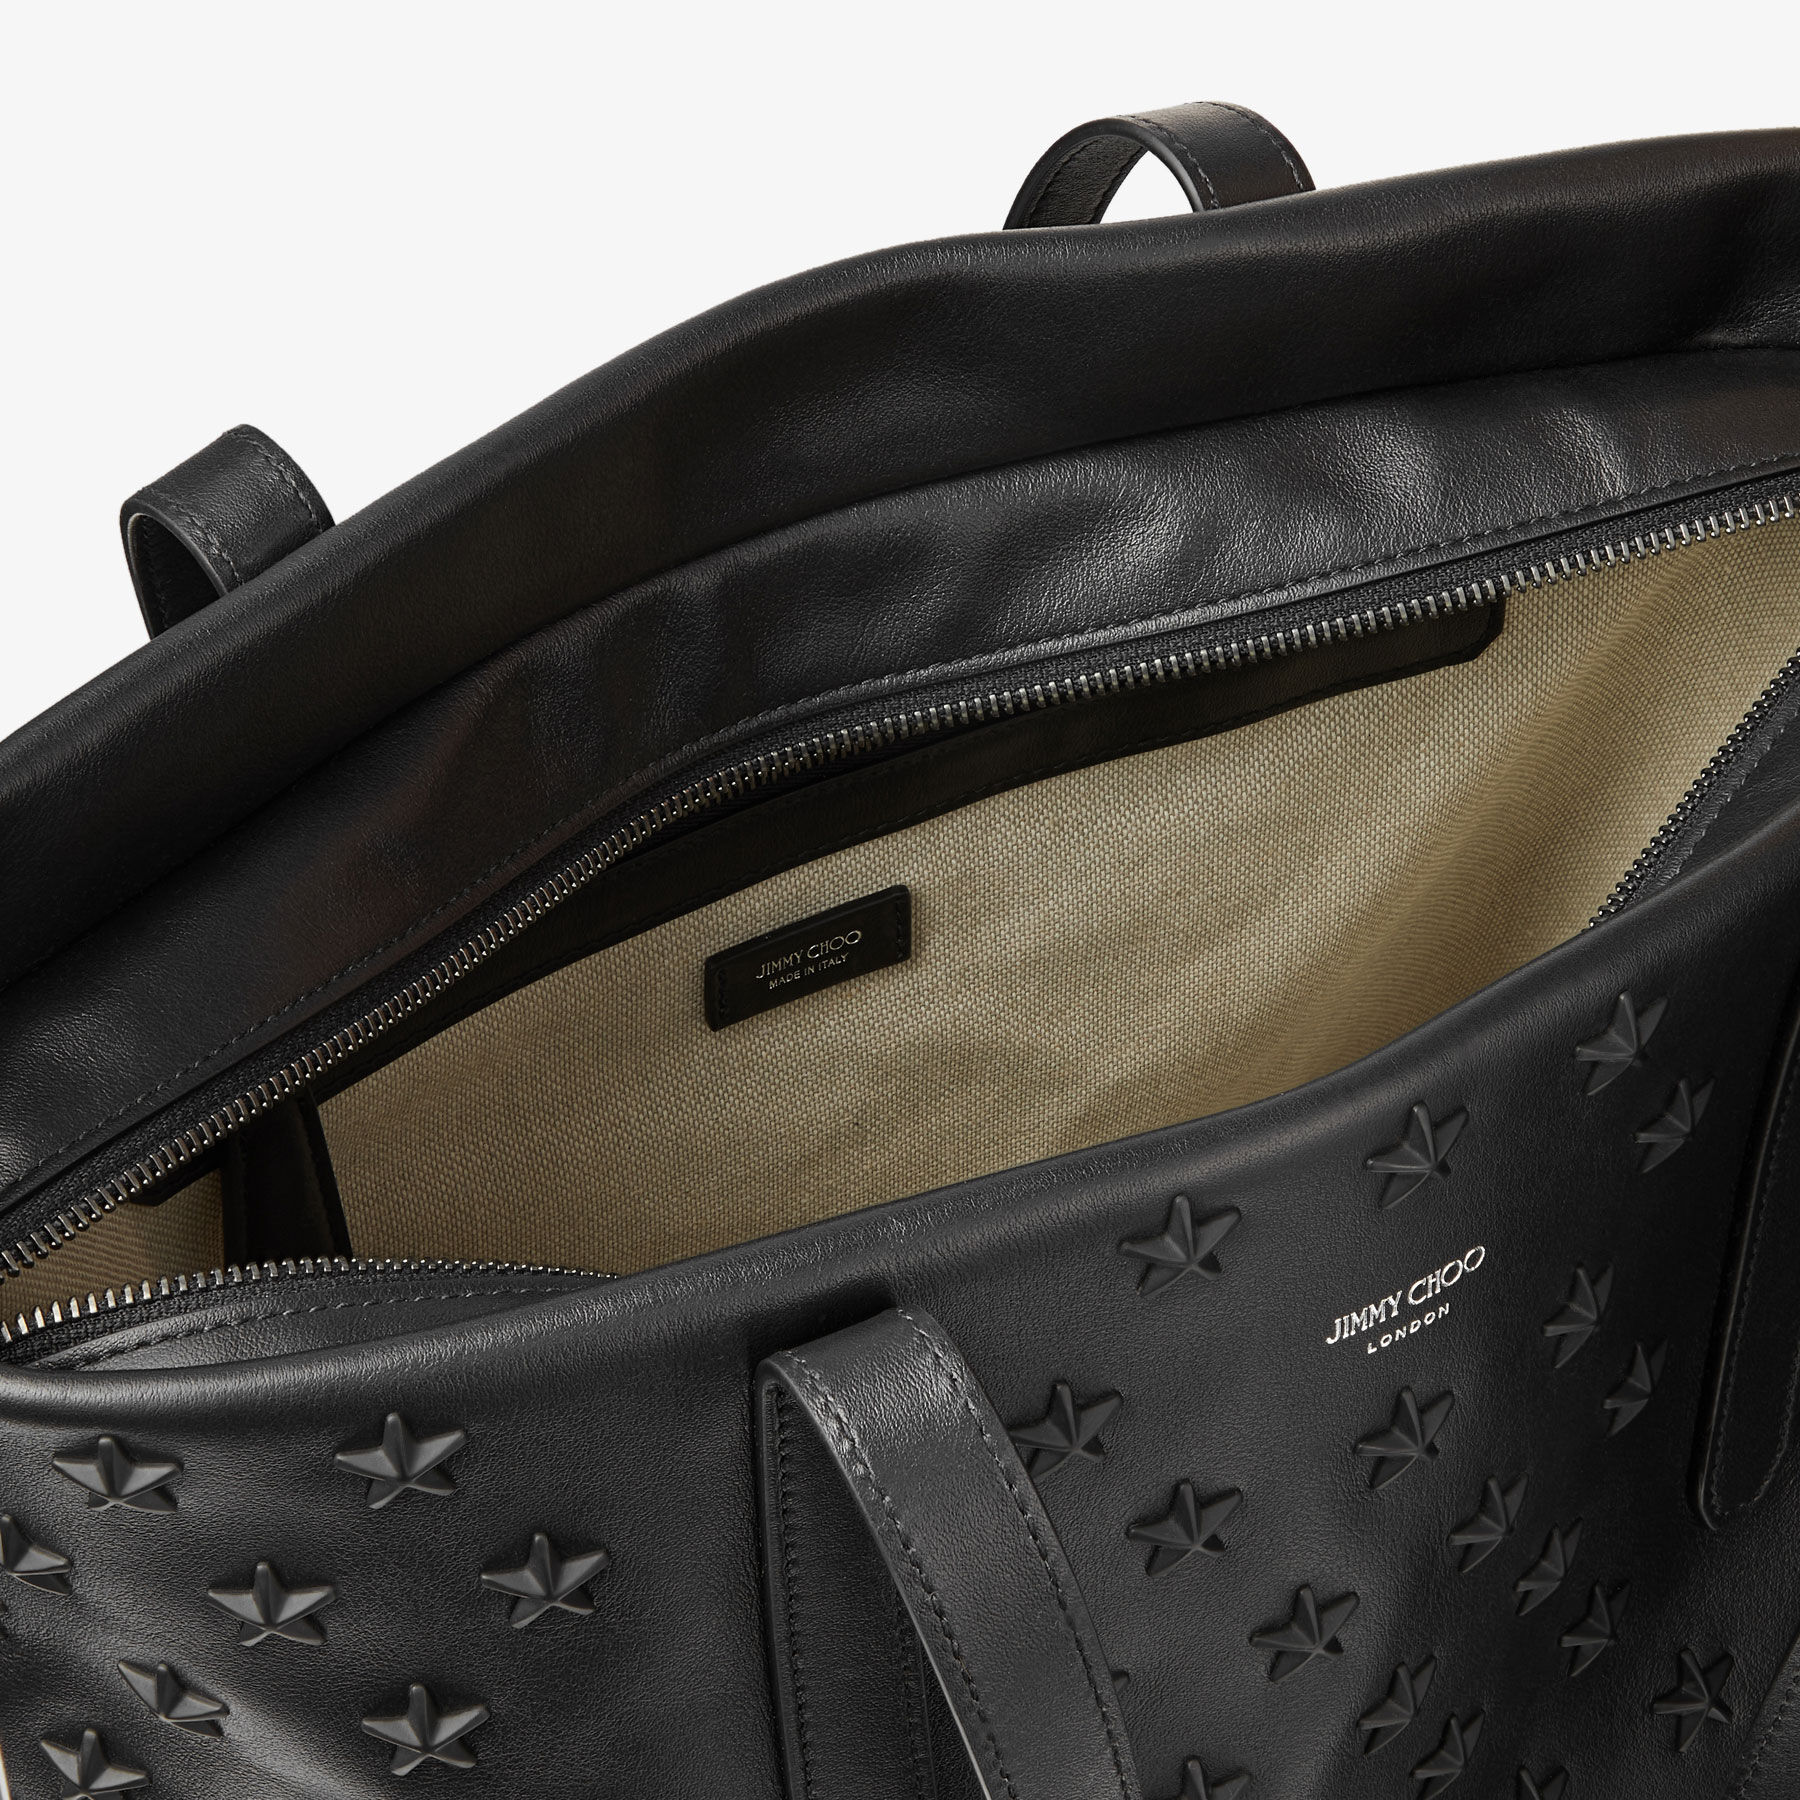 PIMLICO/S N/S | Black Leather Tote Bag with Stars | Autumn 